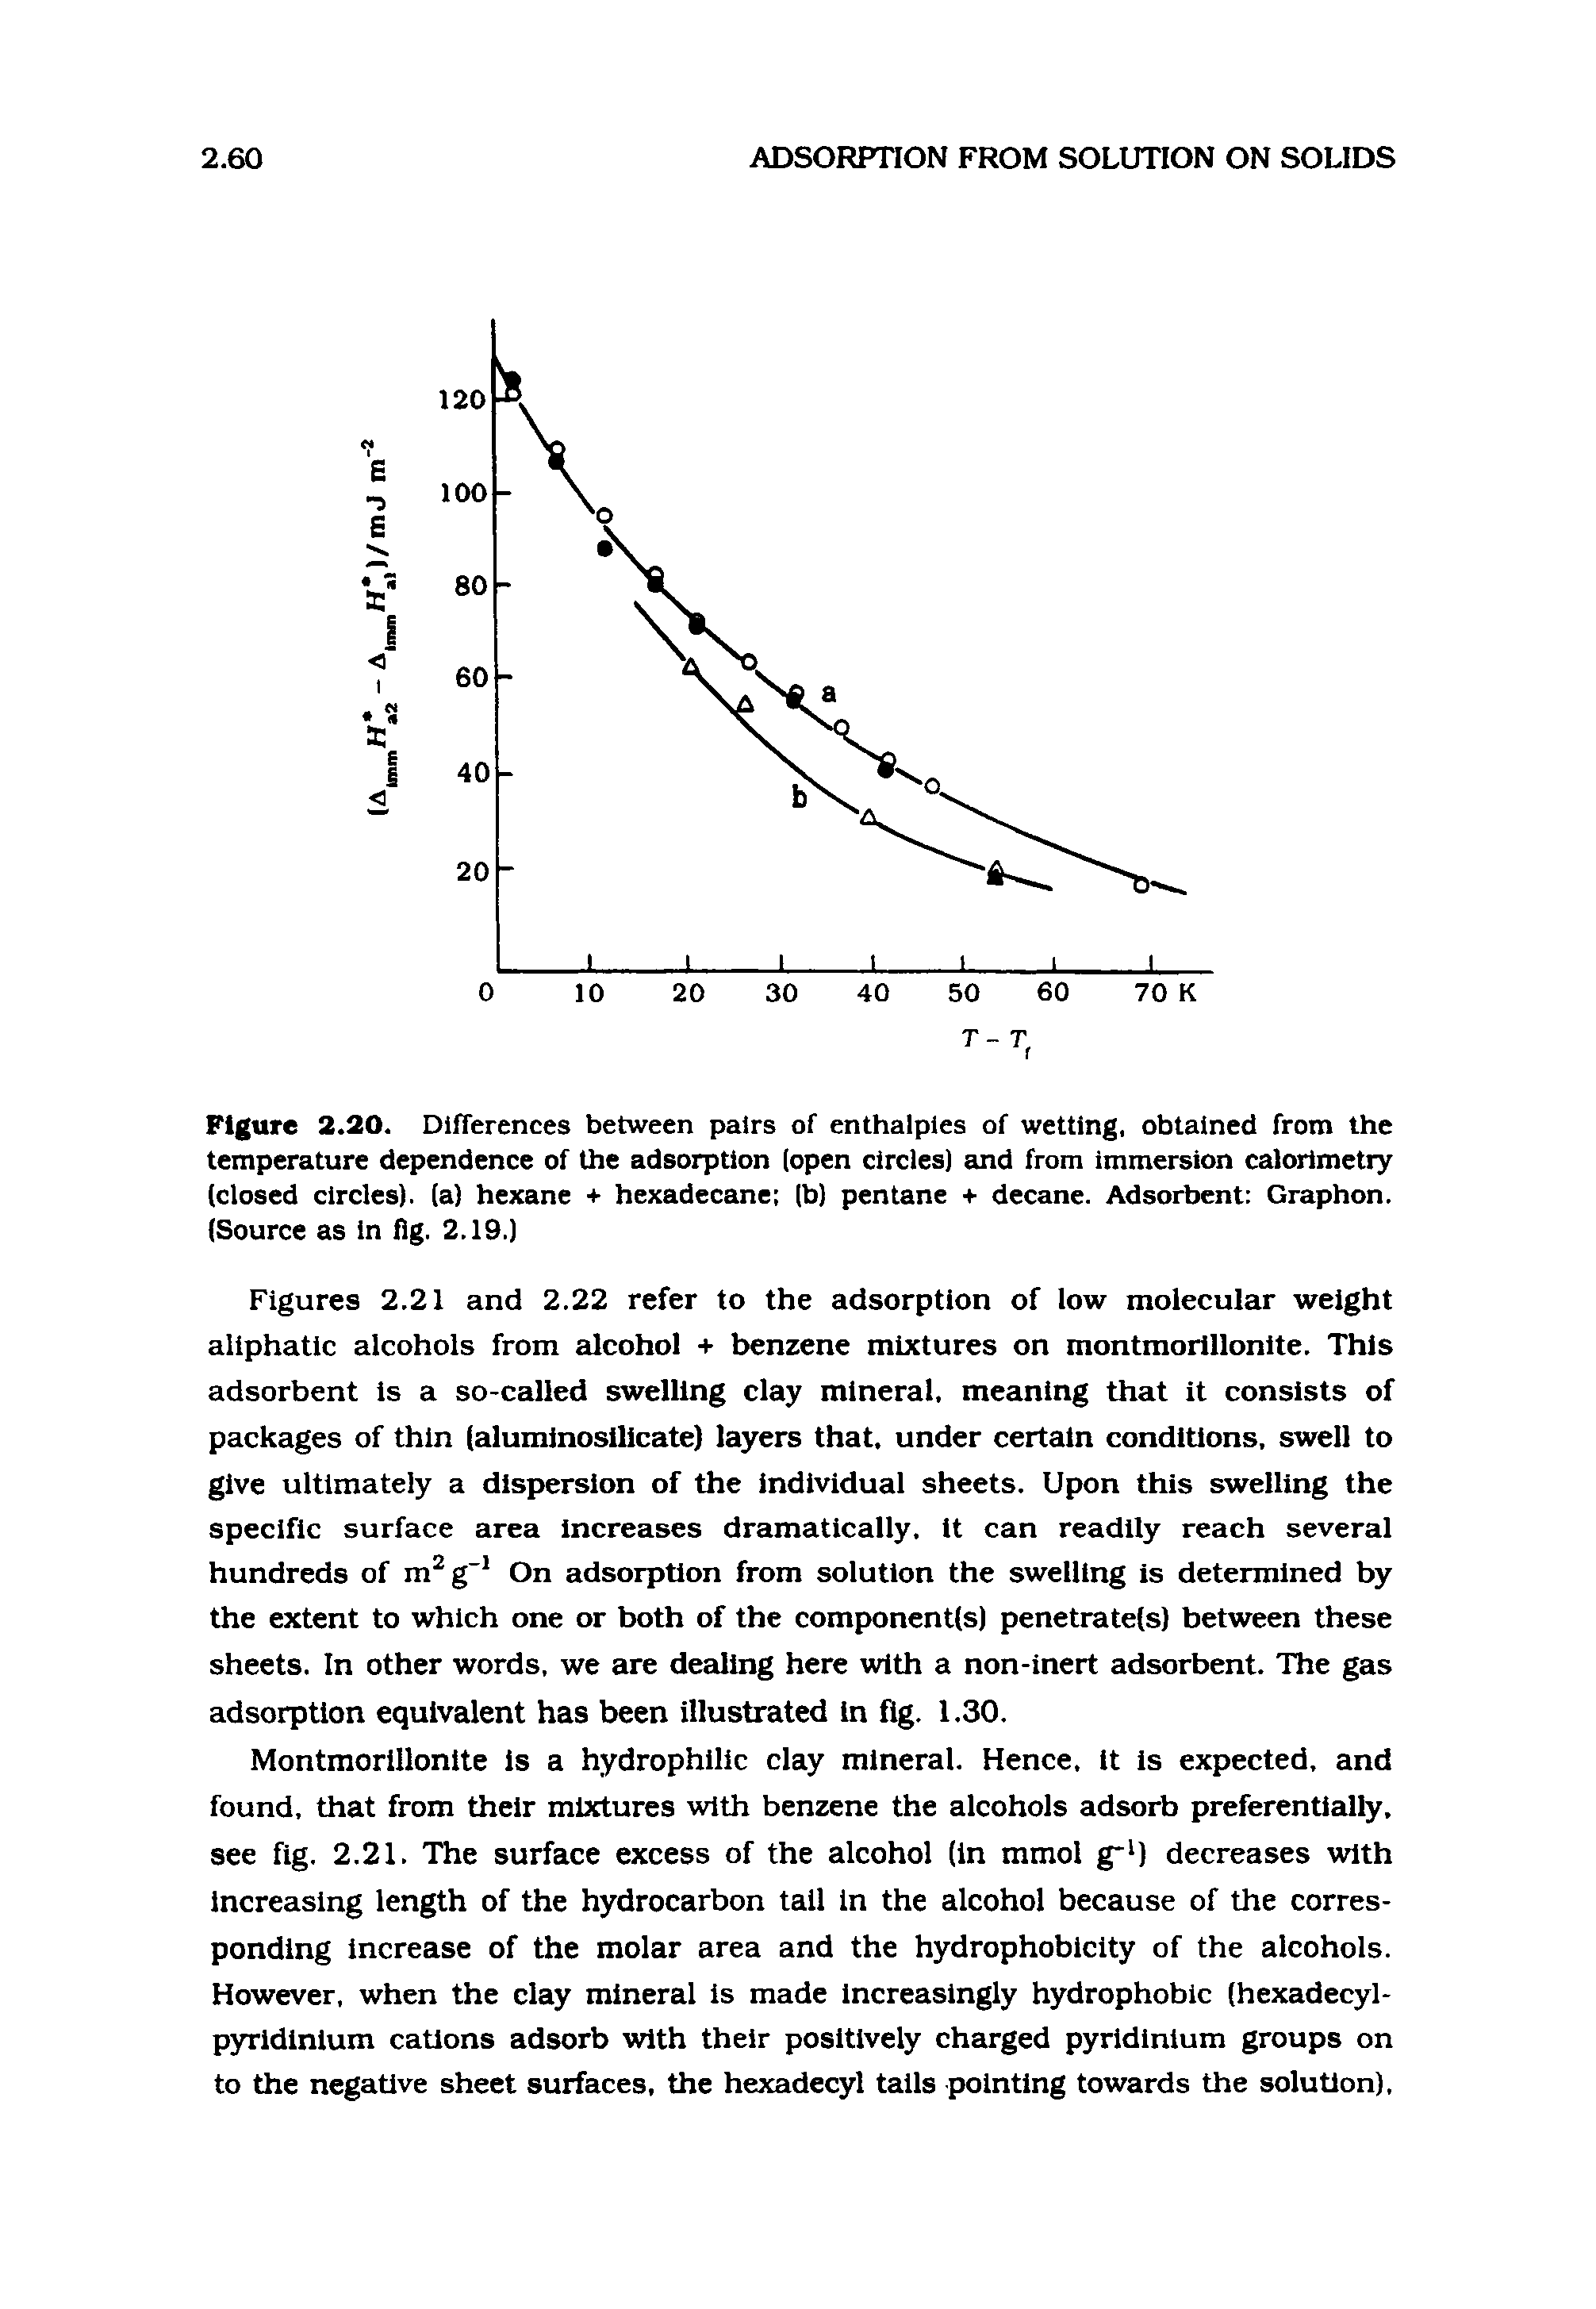 Figures 2.21 and 2.22 refer to the adsorption of low molecular weight aliphatic alcohols from alcohol + benzene mixtures on montmorillonite. This adsorbent Is a so-called swelling clay mineral, meaning that it consists of packages of thin (aluminosilicate) layers that, under certain conditions, swell to give ultimately a dispersion of the individual sheets. Upon this swelling the specific surface area increases dramatically, it can readily reach several hundreds of m g" On adsorption from solution the swelling is determined by the extent to which one or both of the component(s) penetrate(s) between these sheets. In other words, we are dealing here with a non-inert adsorbent. The gas adsorption equivalent has been illustrated in fig. 1.30.